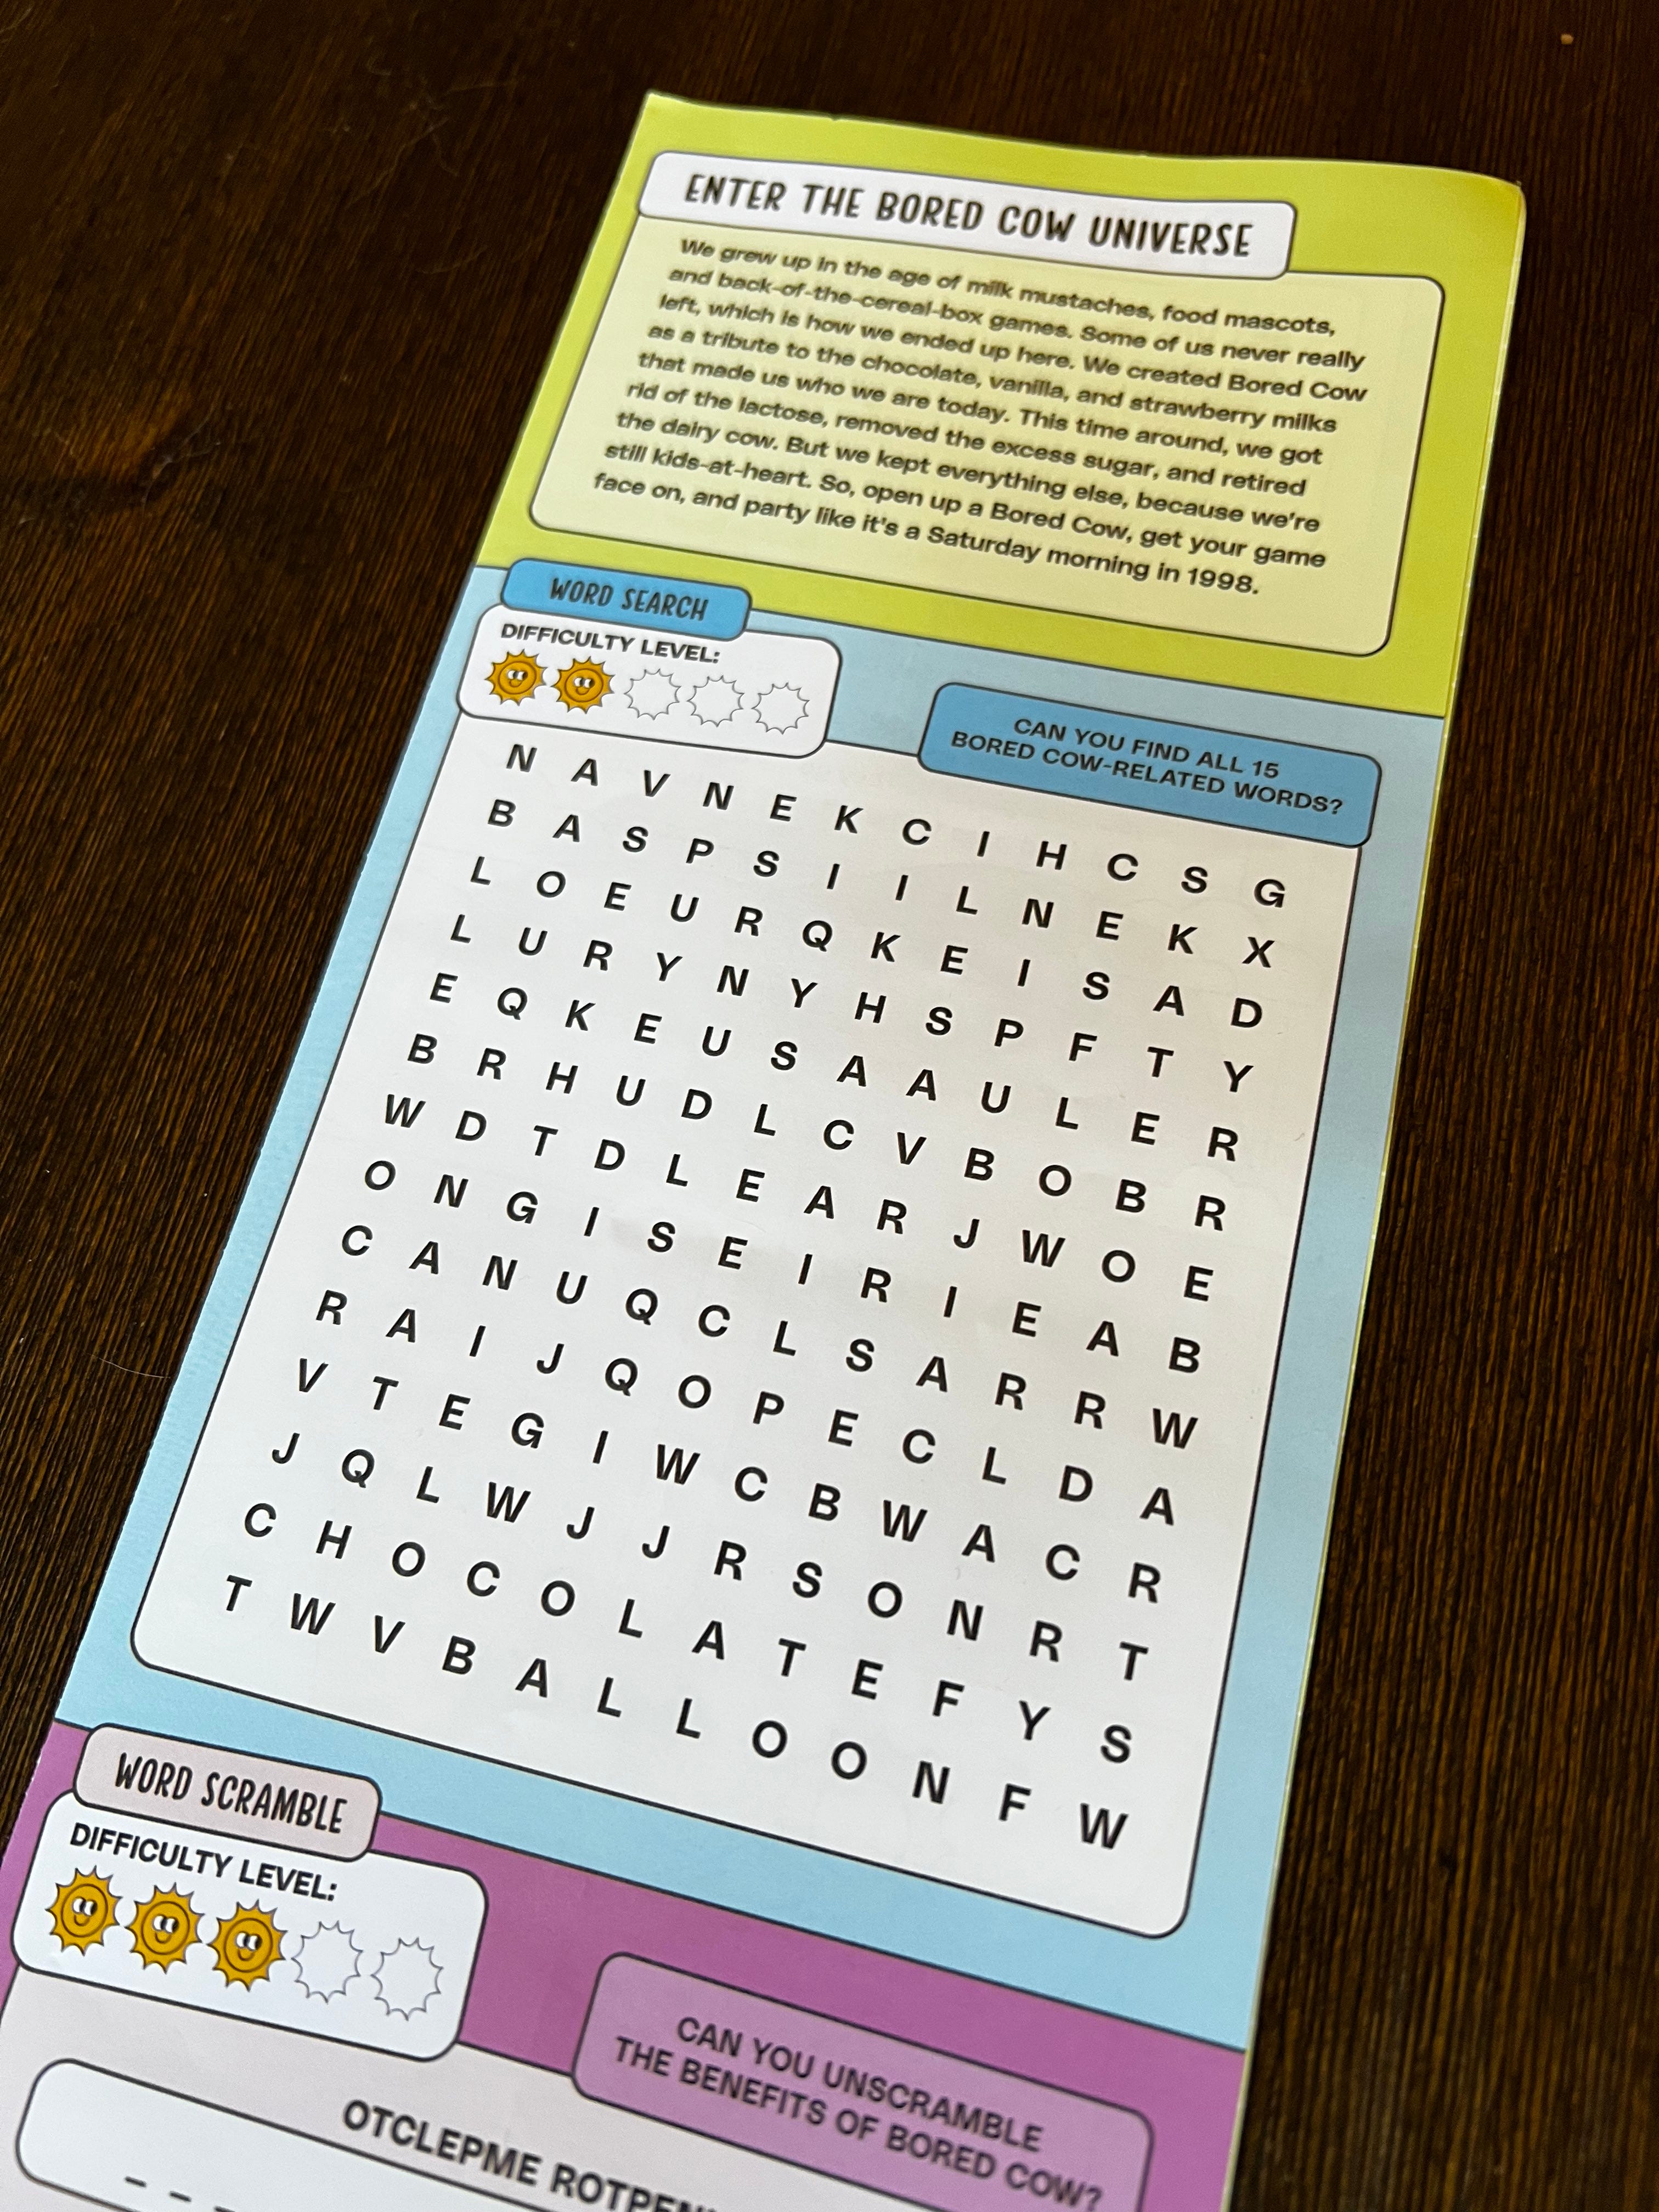 The Bored Cow activity booklet, unfolded to show the word search.